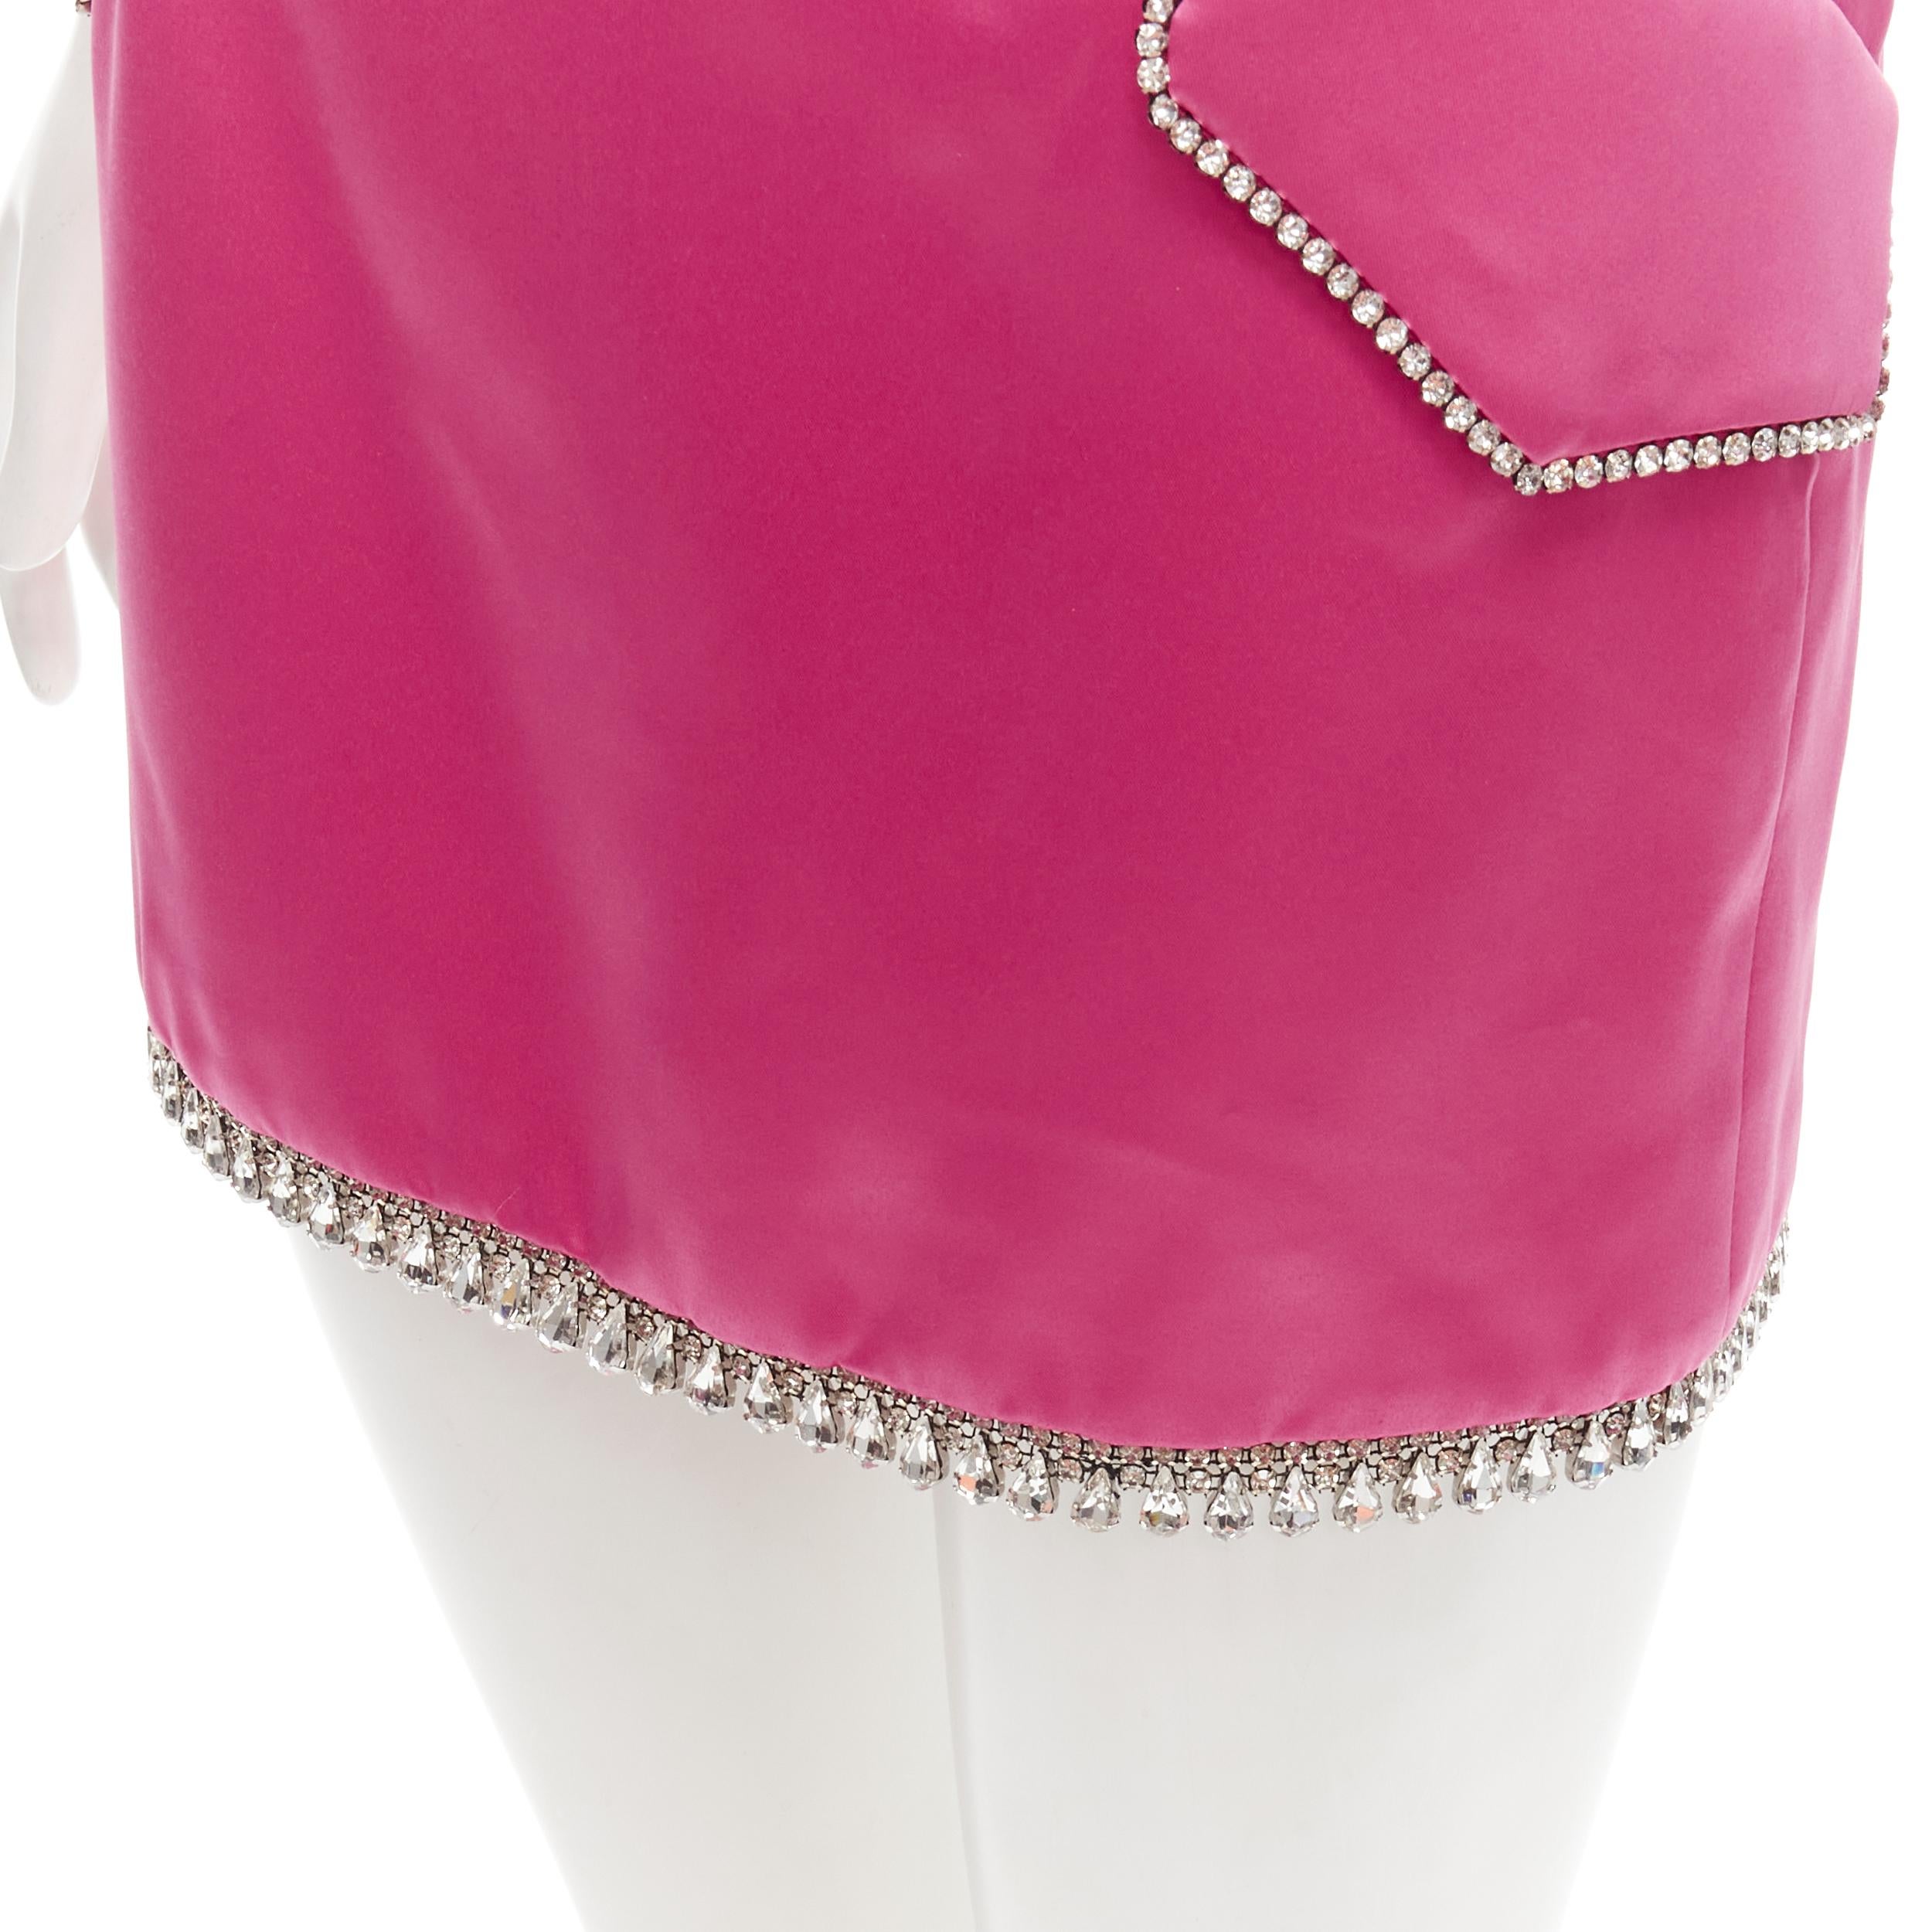 GIUSEPPE DI MORABITO pink satin bling crystal rhinestone mini skirt IT38 XS
Reference: AAWC/A00378
Brand: Giuseppe Di Morabito
Material: Polyester
Color: Pink, Silver
Pattern: Solid
Closure: Zip
Lining: Fabric
Extra Details: Back invisible zip